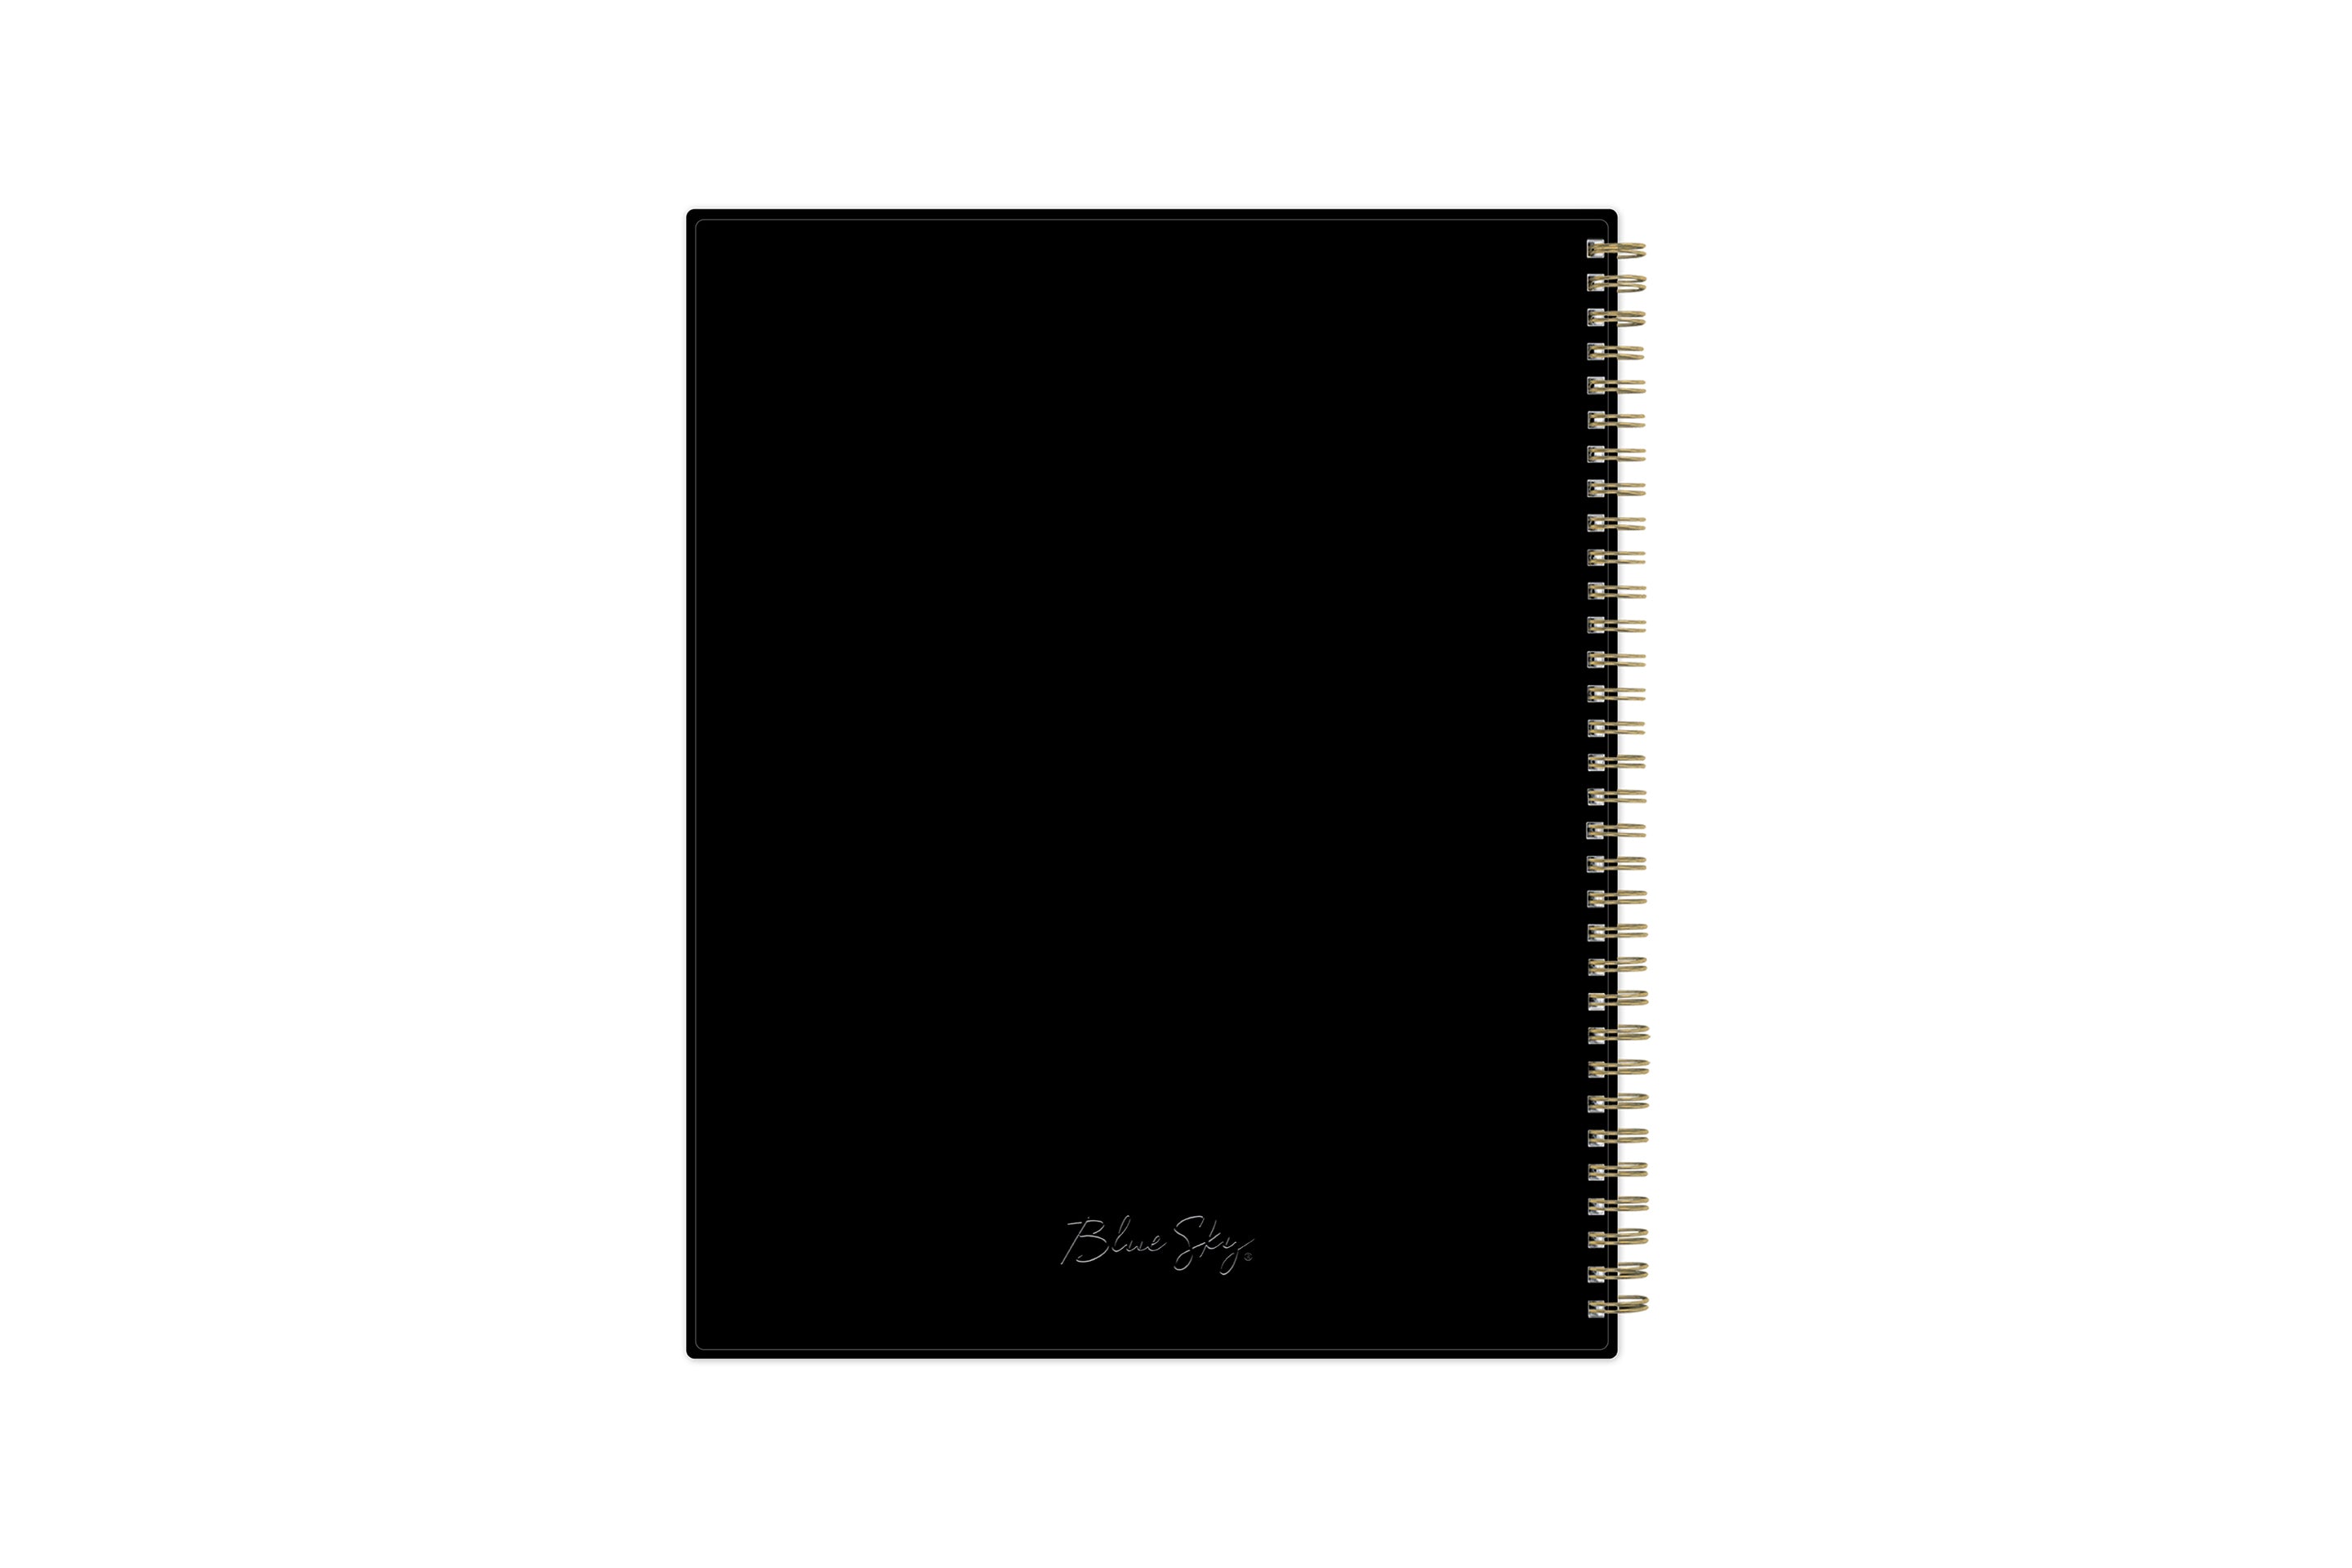 The January 2024 - December 2024 appointment book from Blue Sky features a flexible black back cover and gold silver wire-o binding